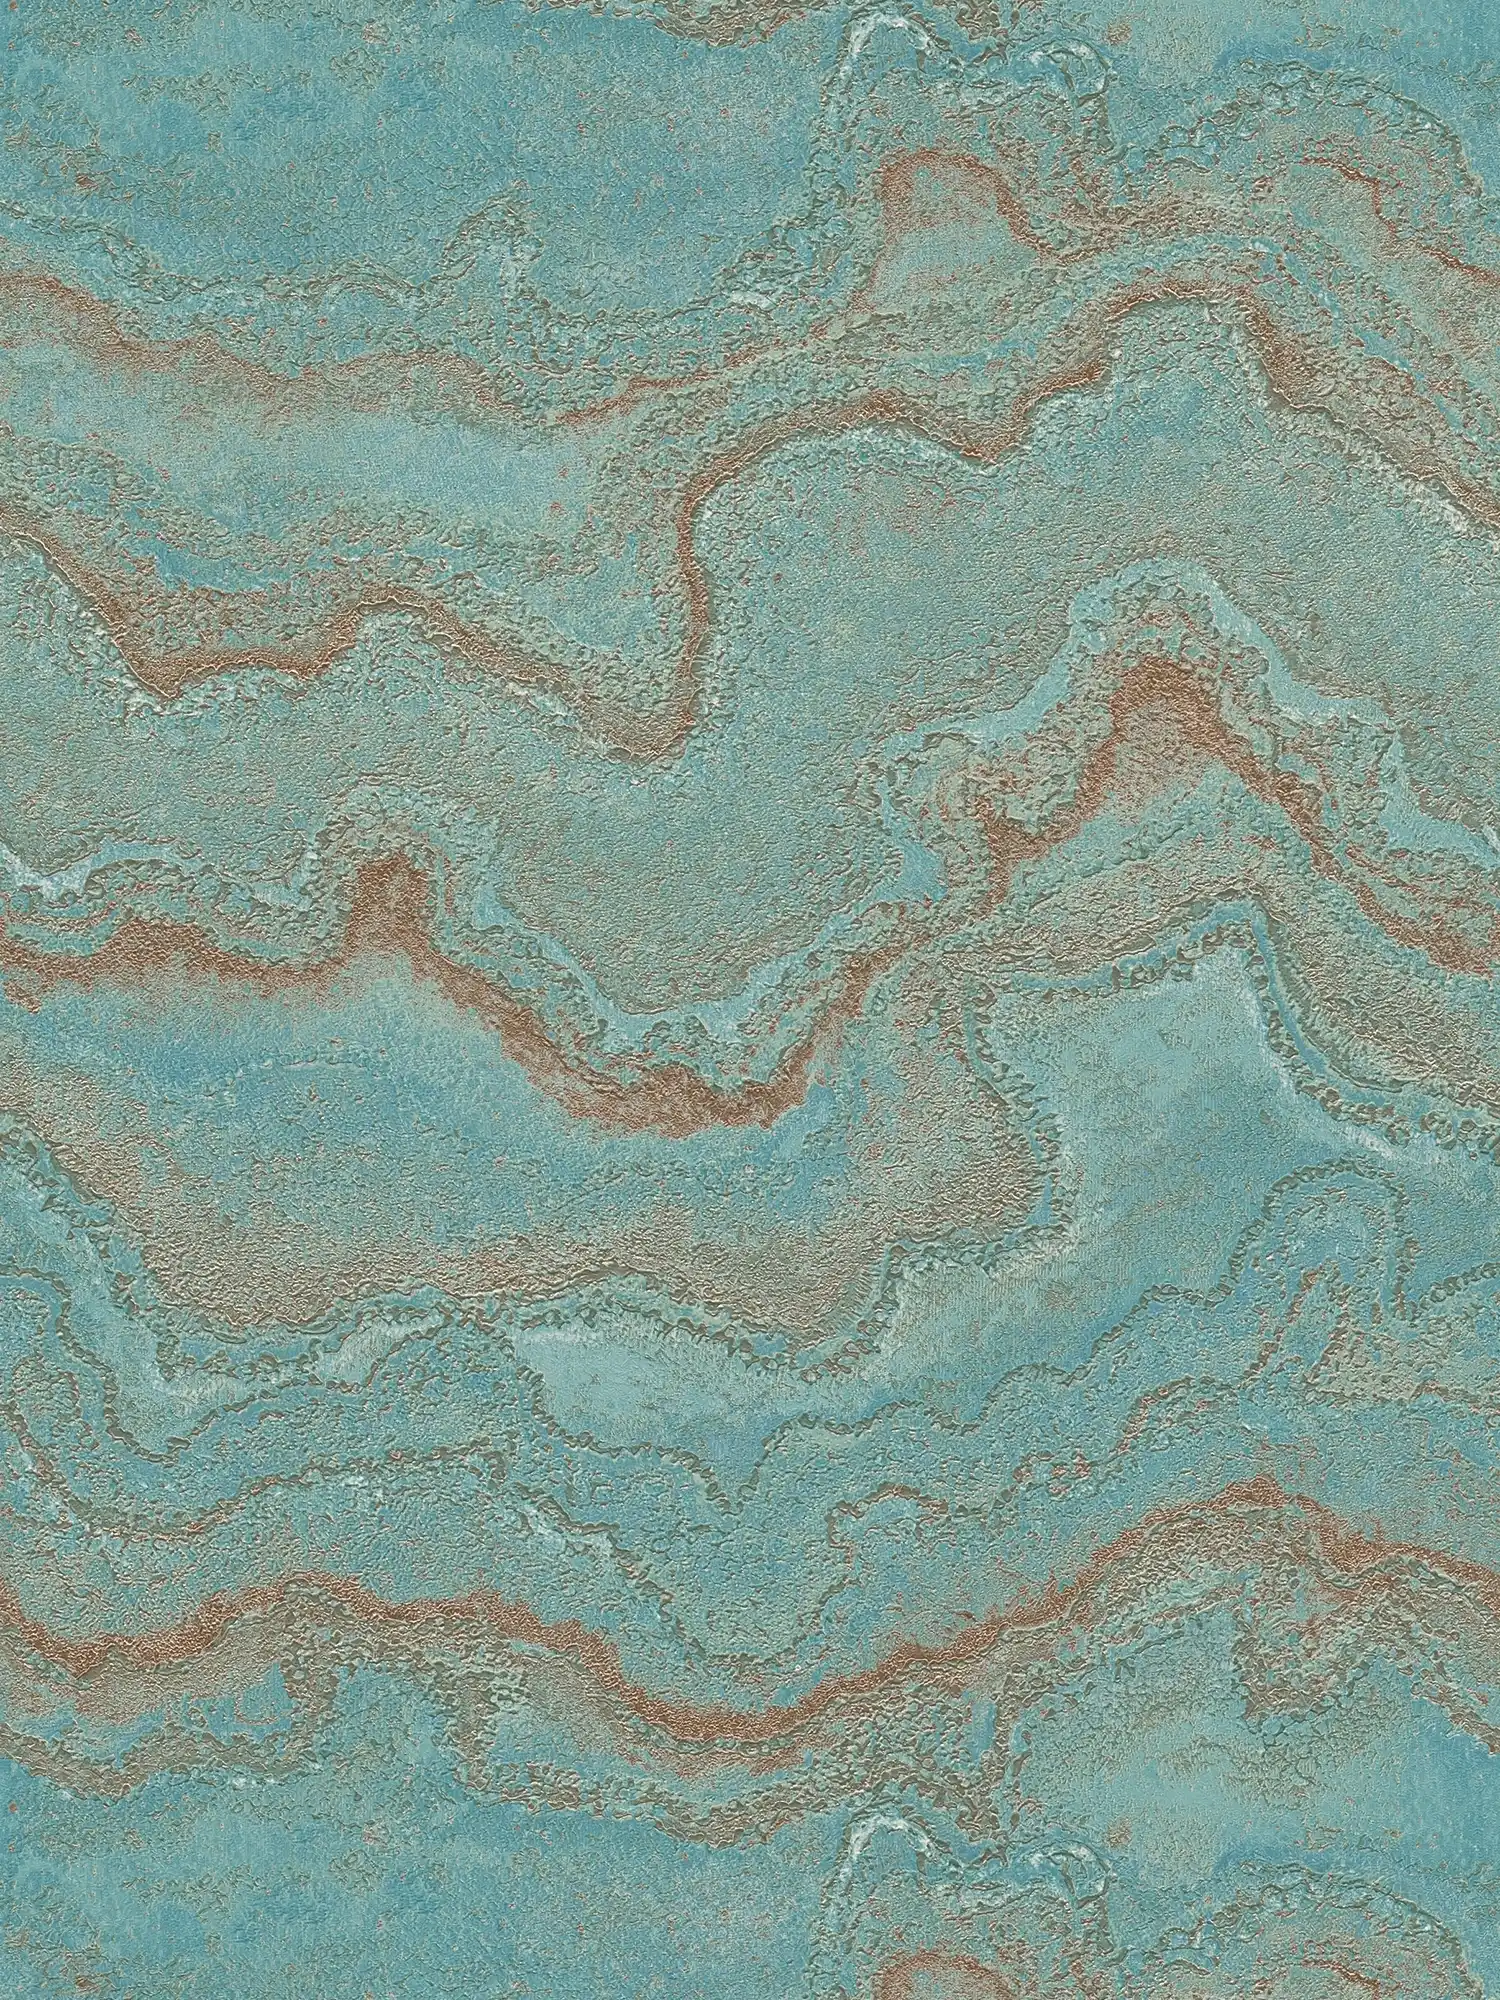 Marbled non-woven wallpaper with metallic effect - blue, turquoise, gold
